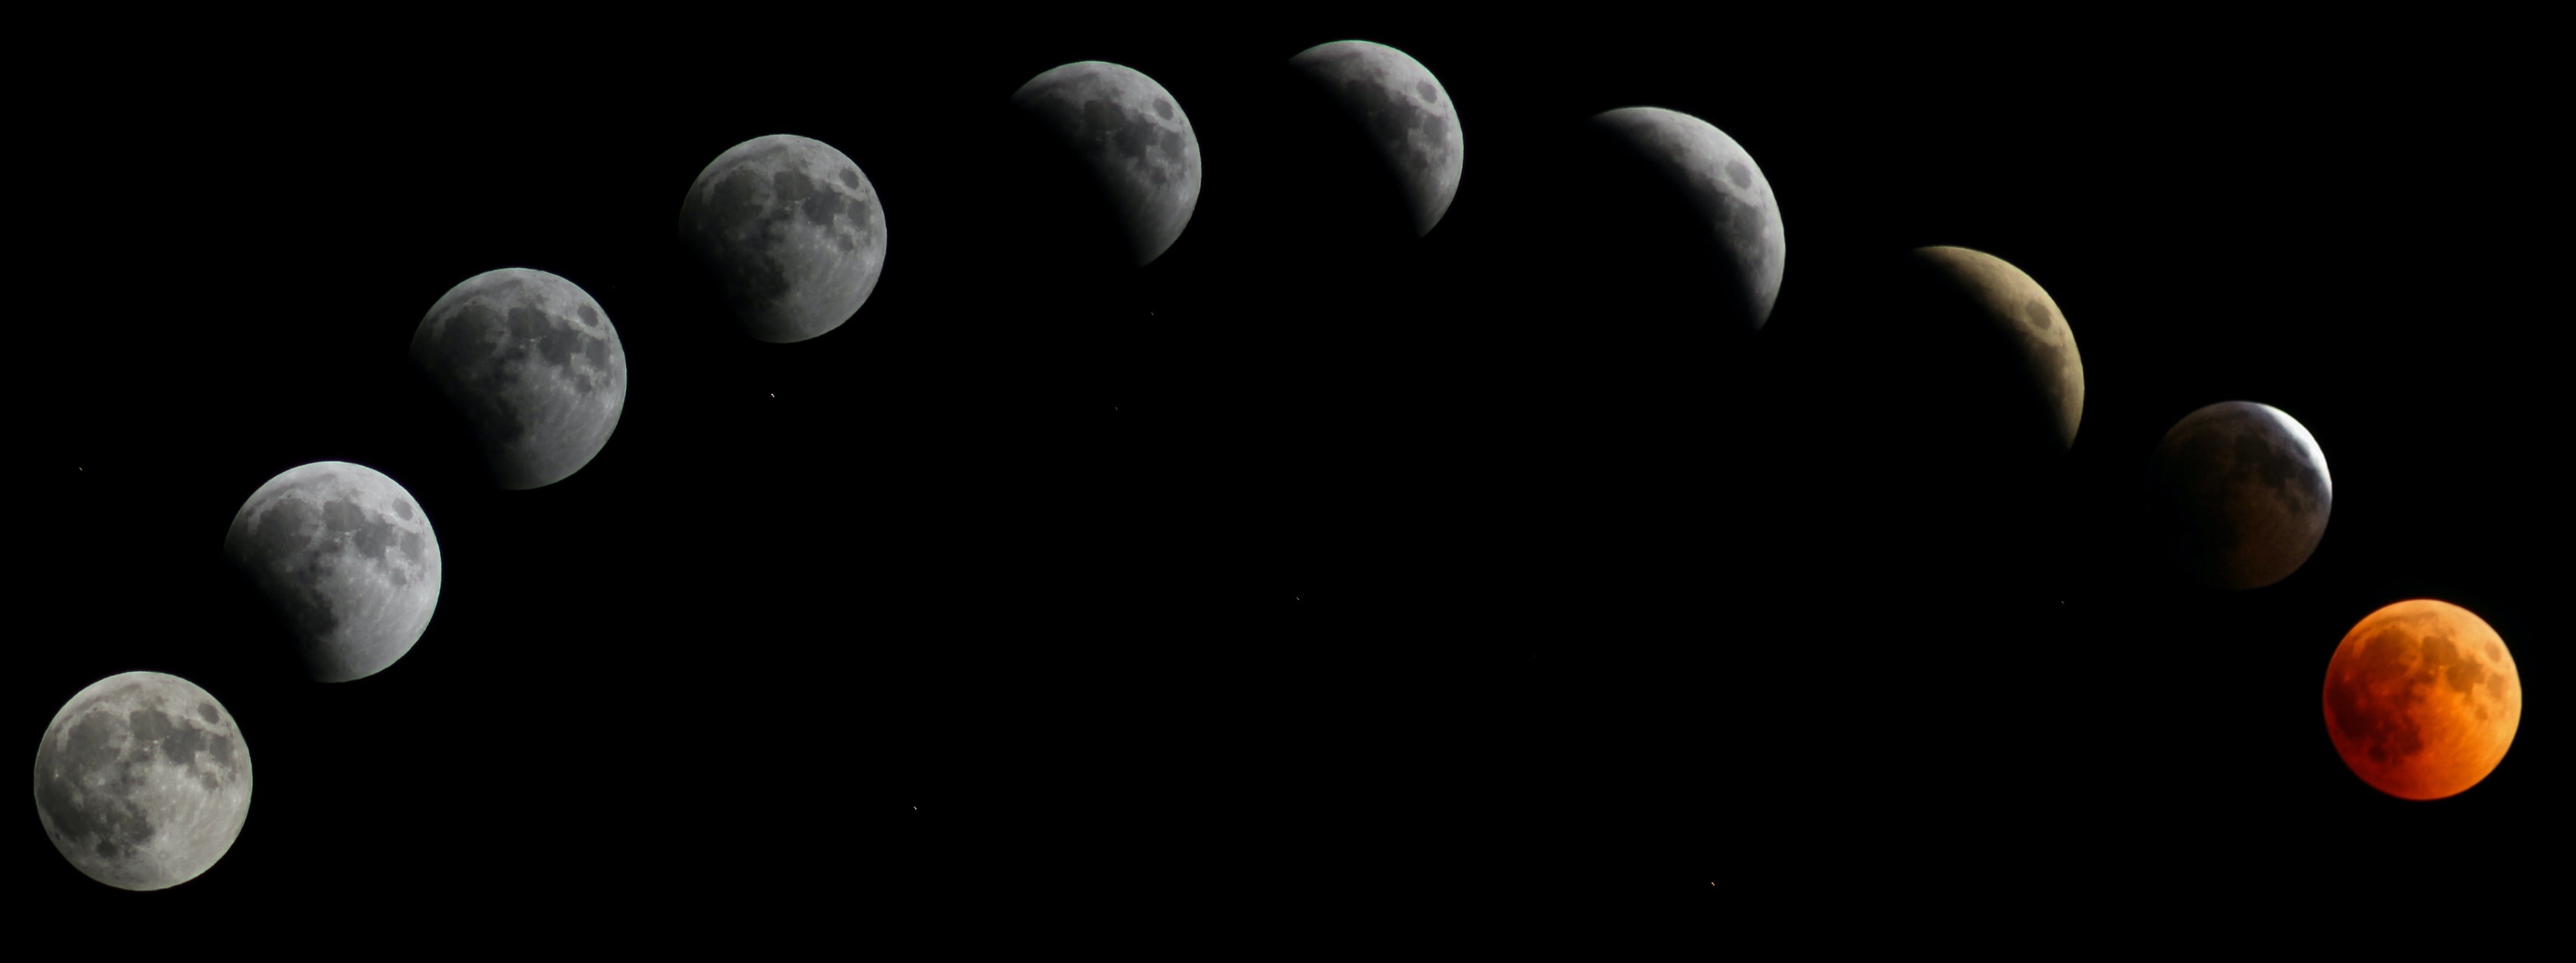 Timelapse of phases of the moon